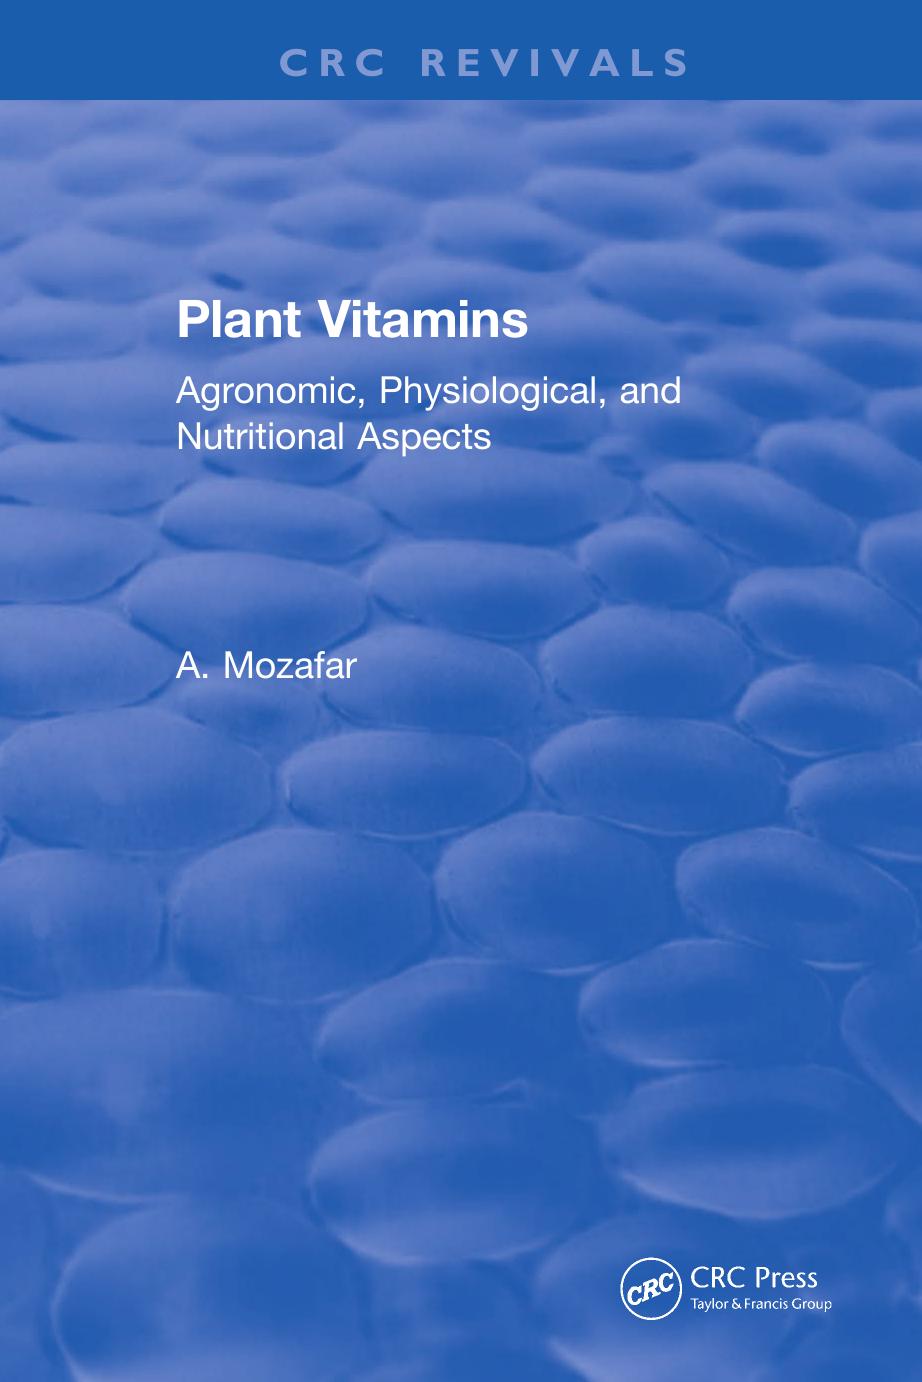 Plant vitamins agronomic, physiological, and nutritional aspects 2018